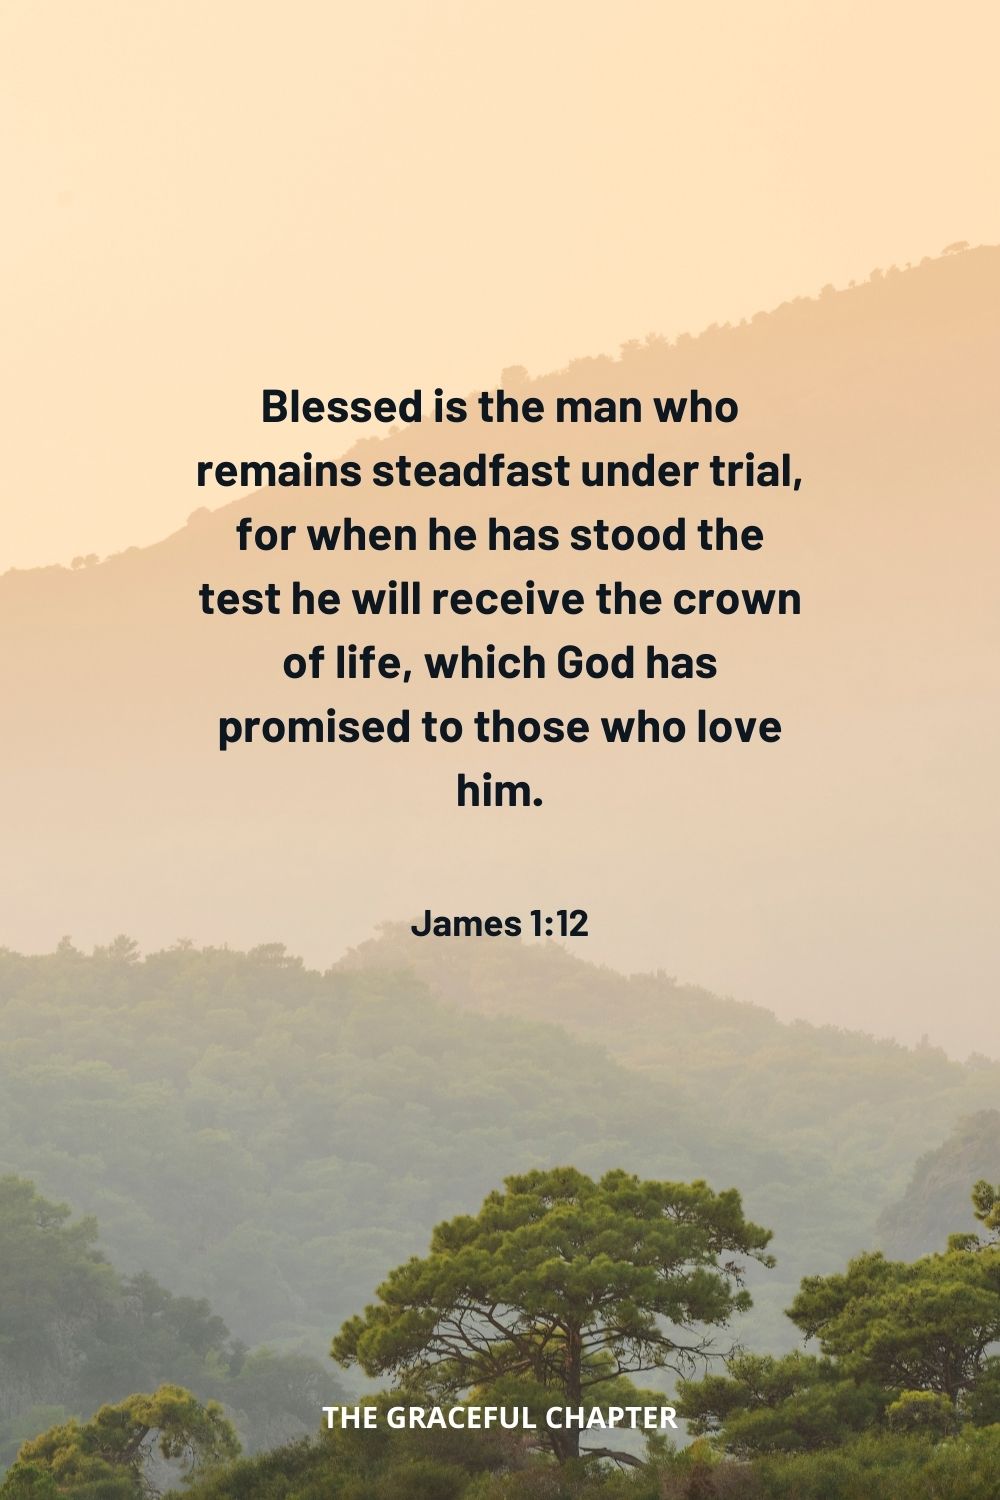 Blessed is the man who remains steadfast under trial, for when he has stood the test he will receive the crown of life, which God has promised to those who love him. James 1:12